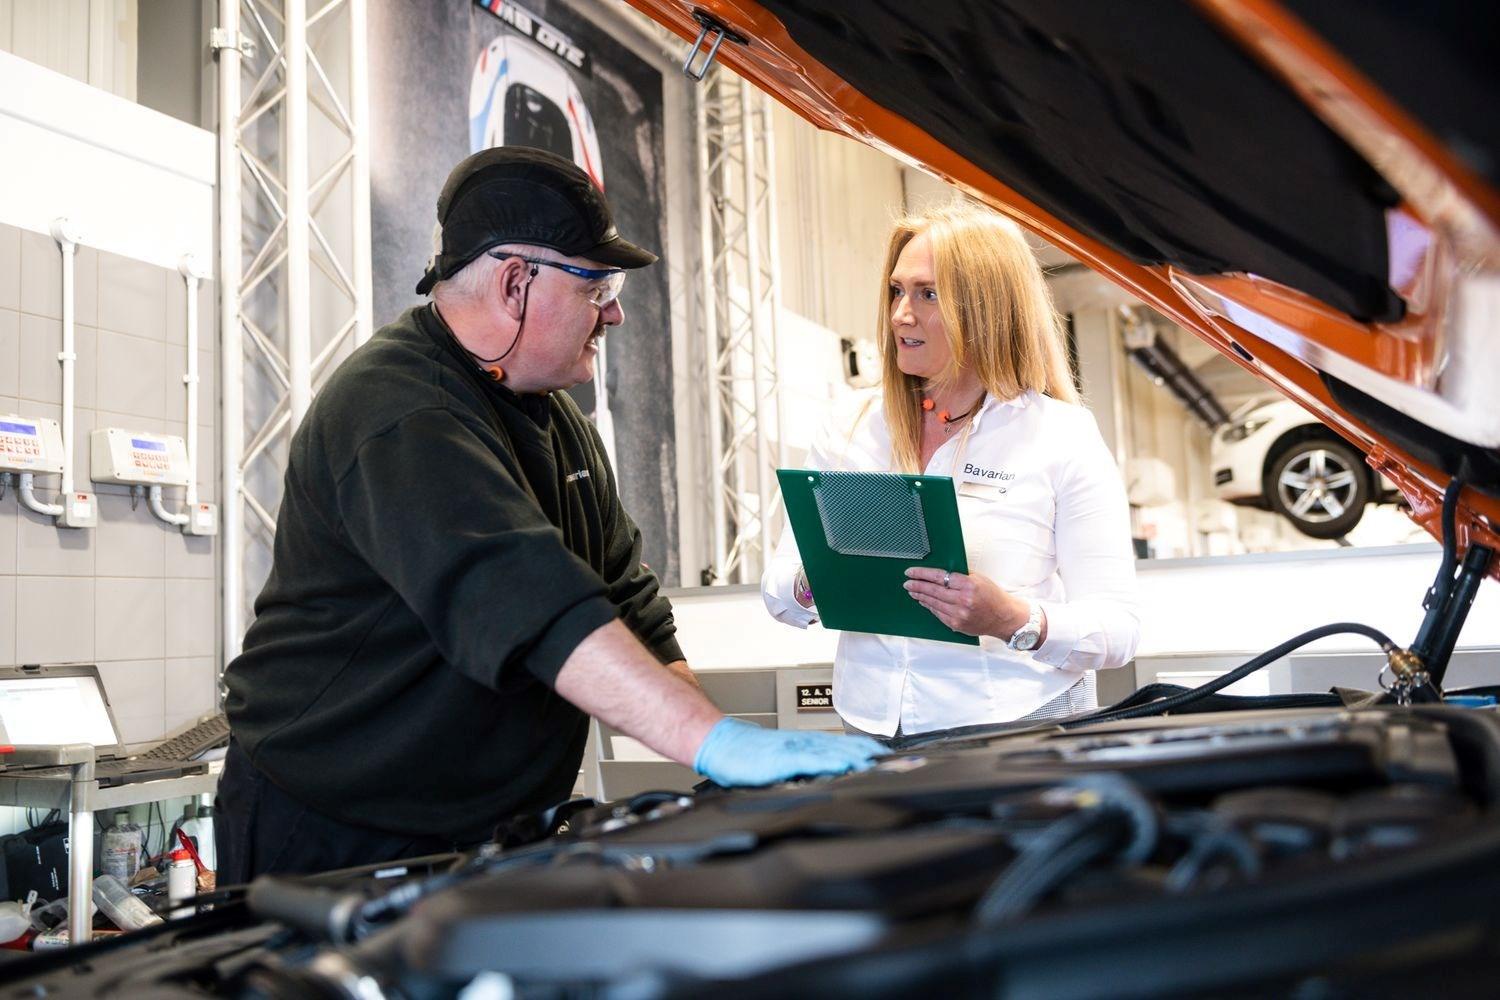 BMW Service Specialist holding clipboard and BMW Technician who is inspecting under the hood of a BMW vehicle, discuss the repairs needing made to a BMW vehicle at the Bavarian BMW Belfast repair centre.